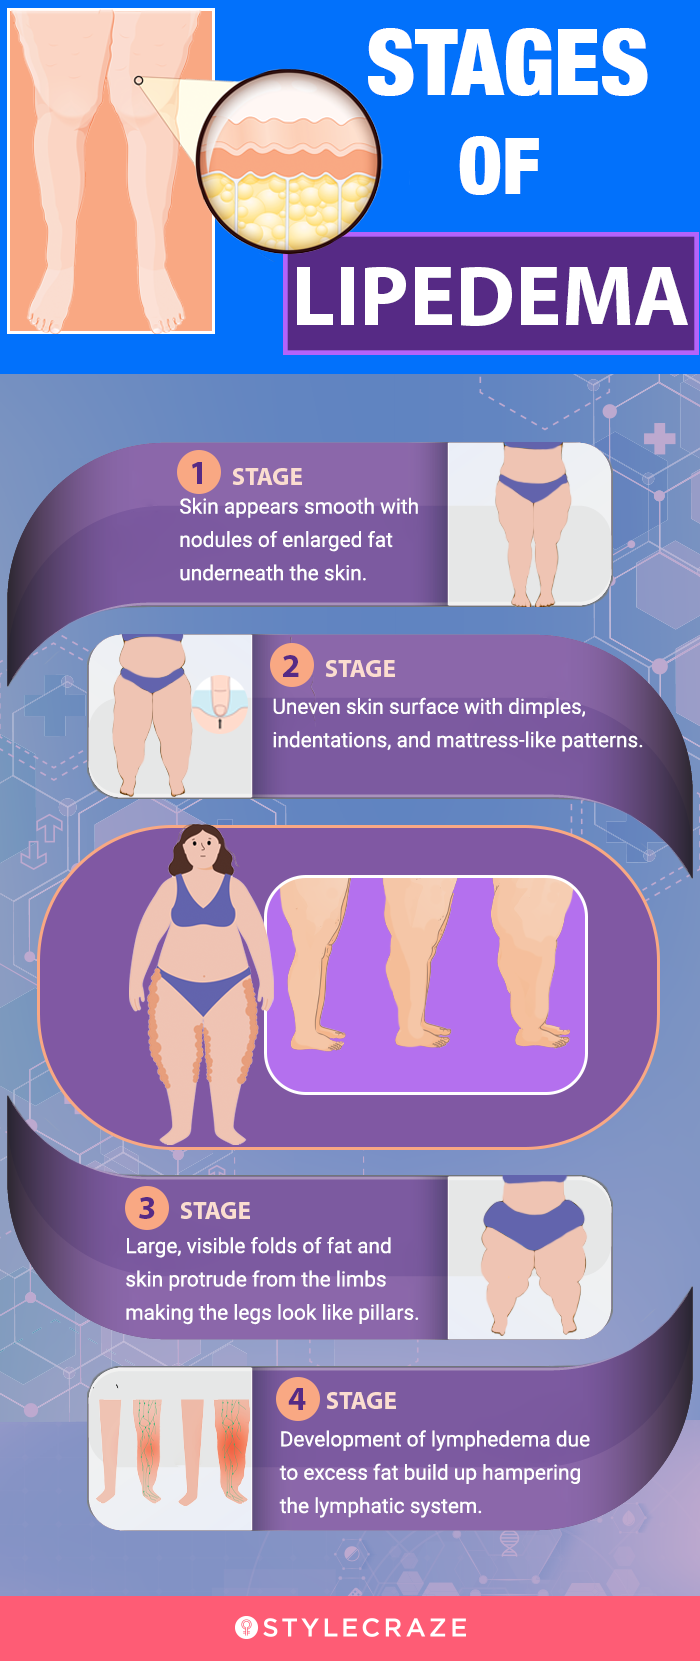 6 Health Benefits Of Lipedema Diet, Exercise, & What To Eat